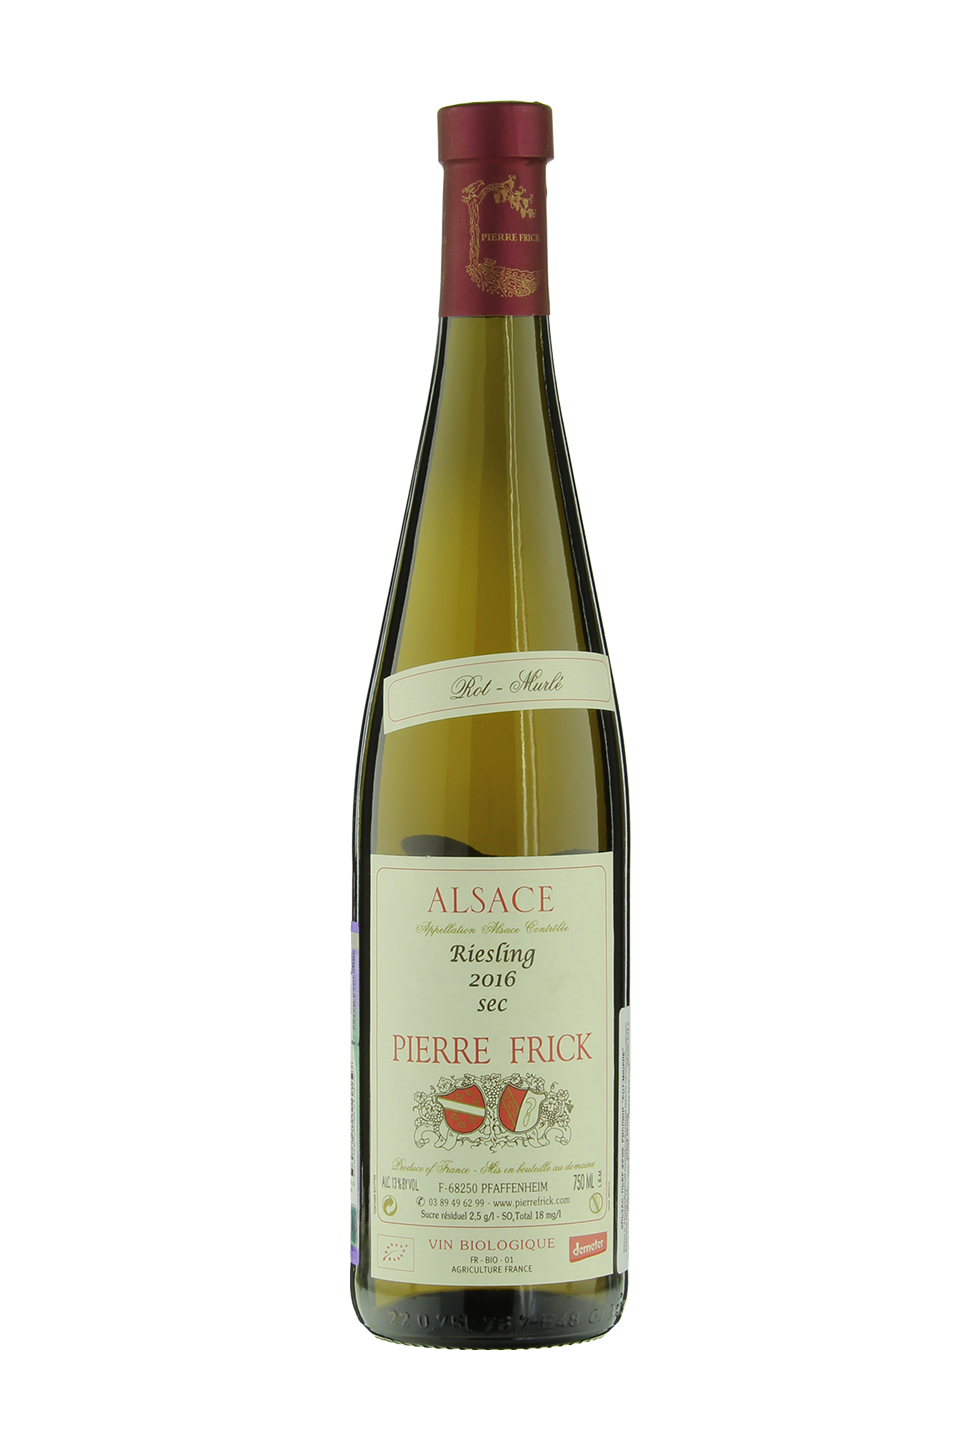 Pierre Frick Rot Murle Riesling Alsace AOC 